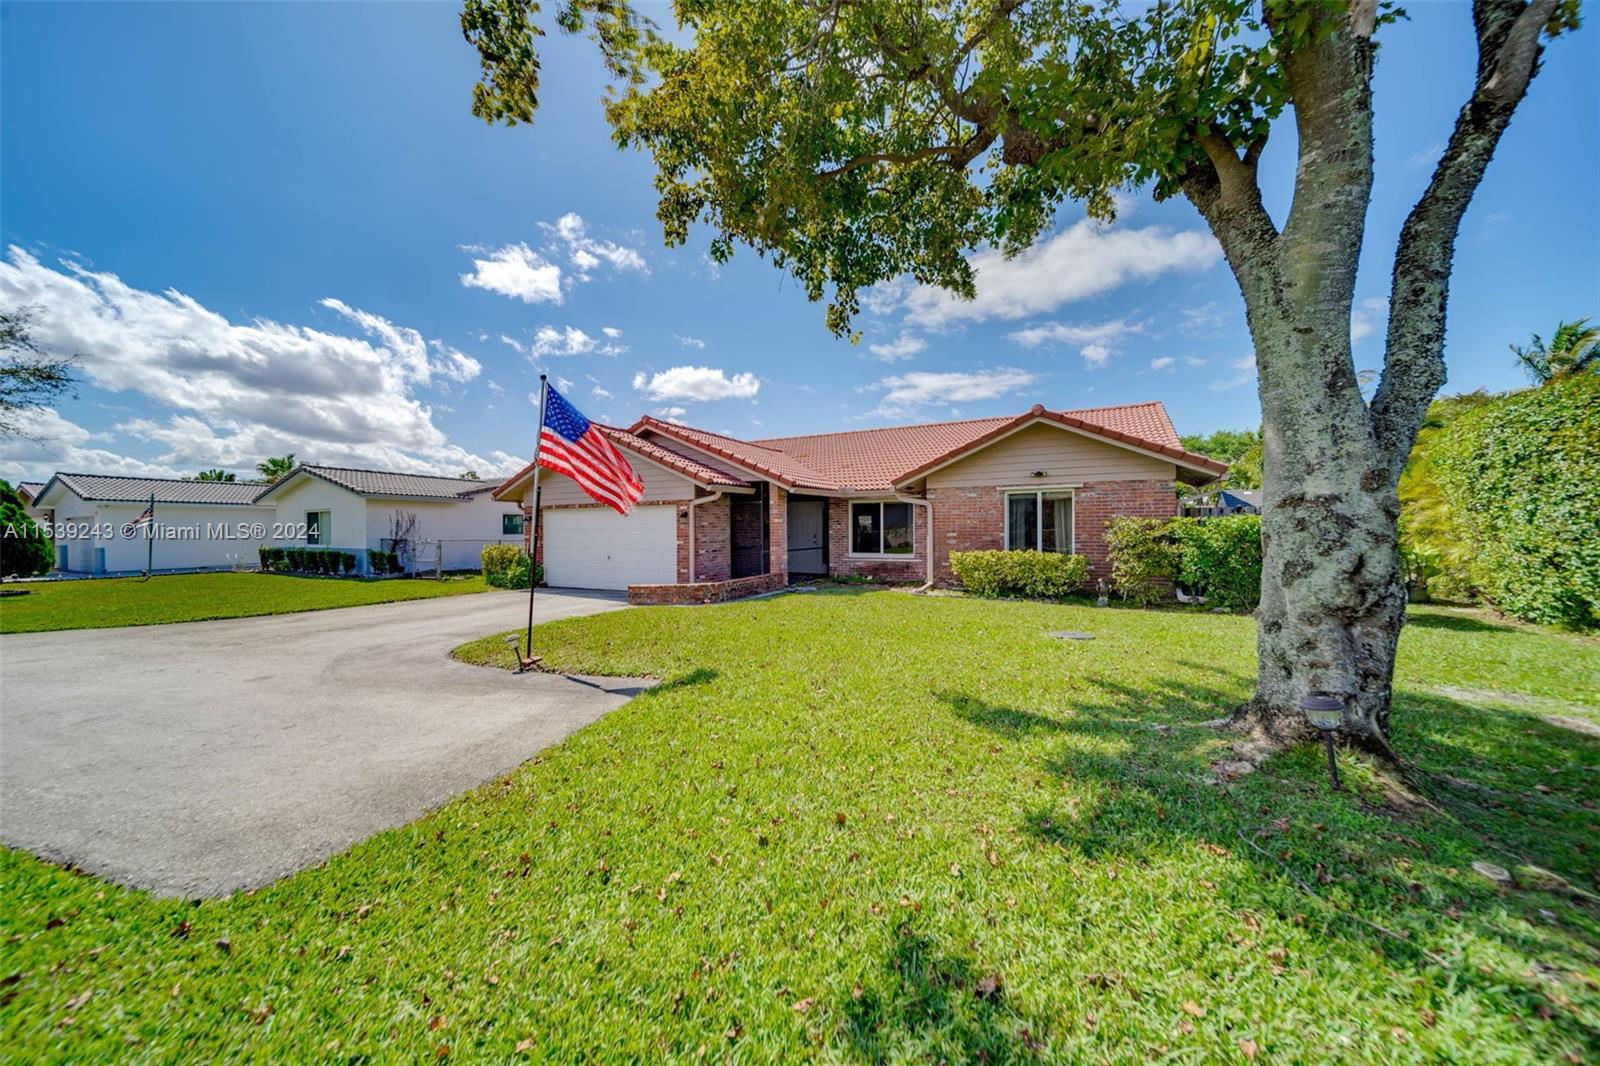 Photo of 3700 NW 113th Ave in Coral Springs, FL